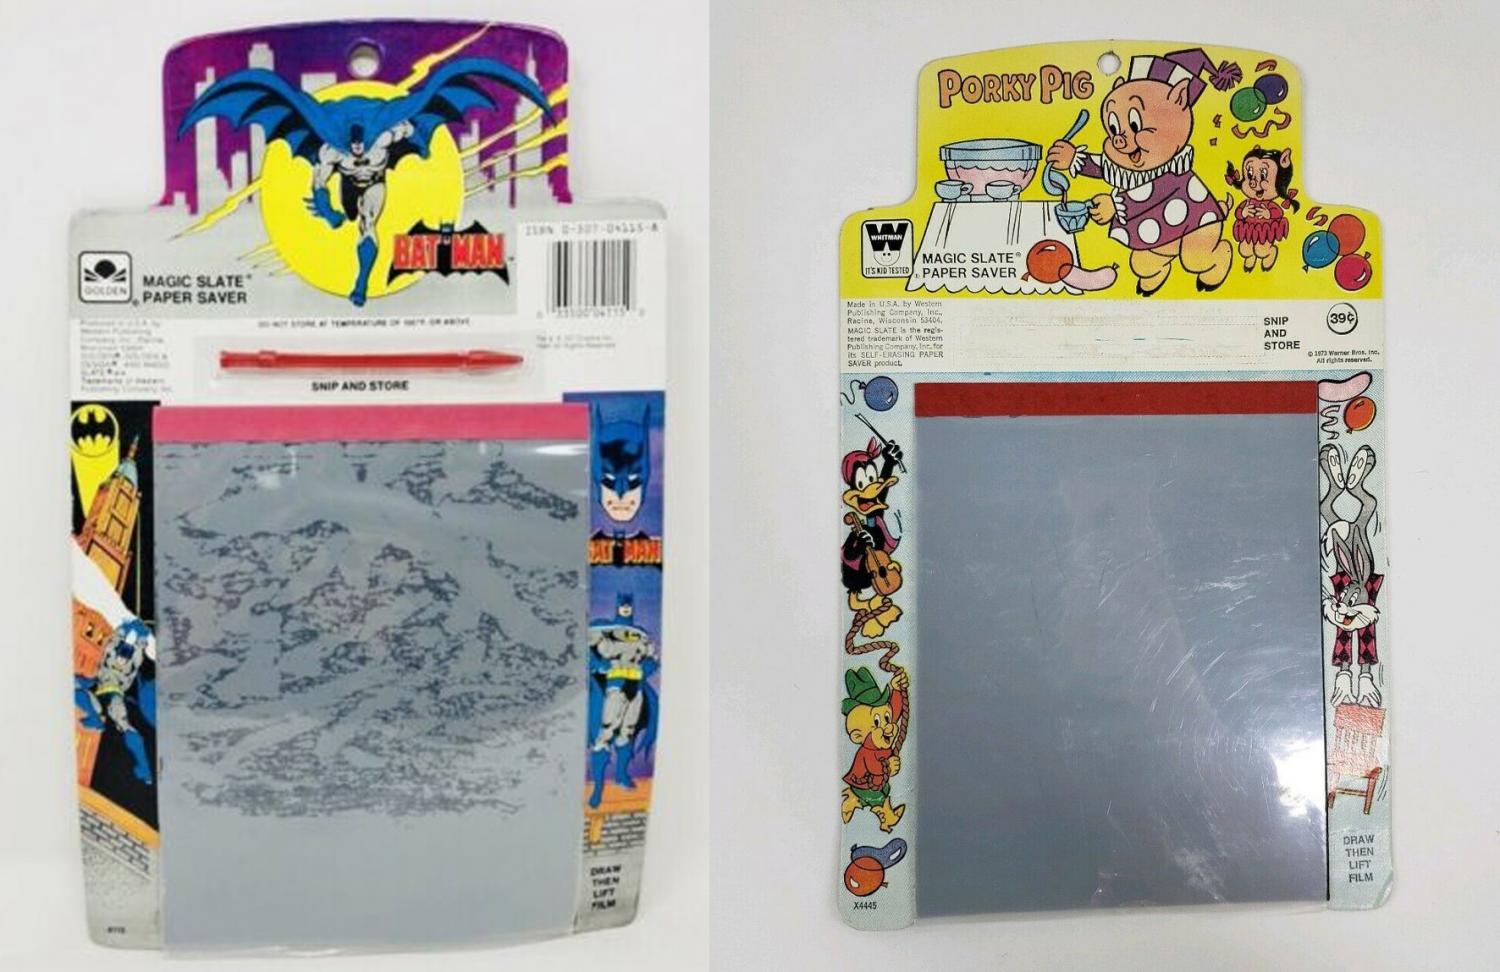 Nostalgic Magic Slate Paper Savers From The 80's and 90's